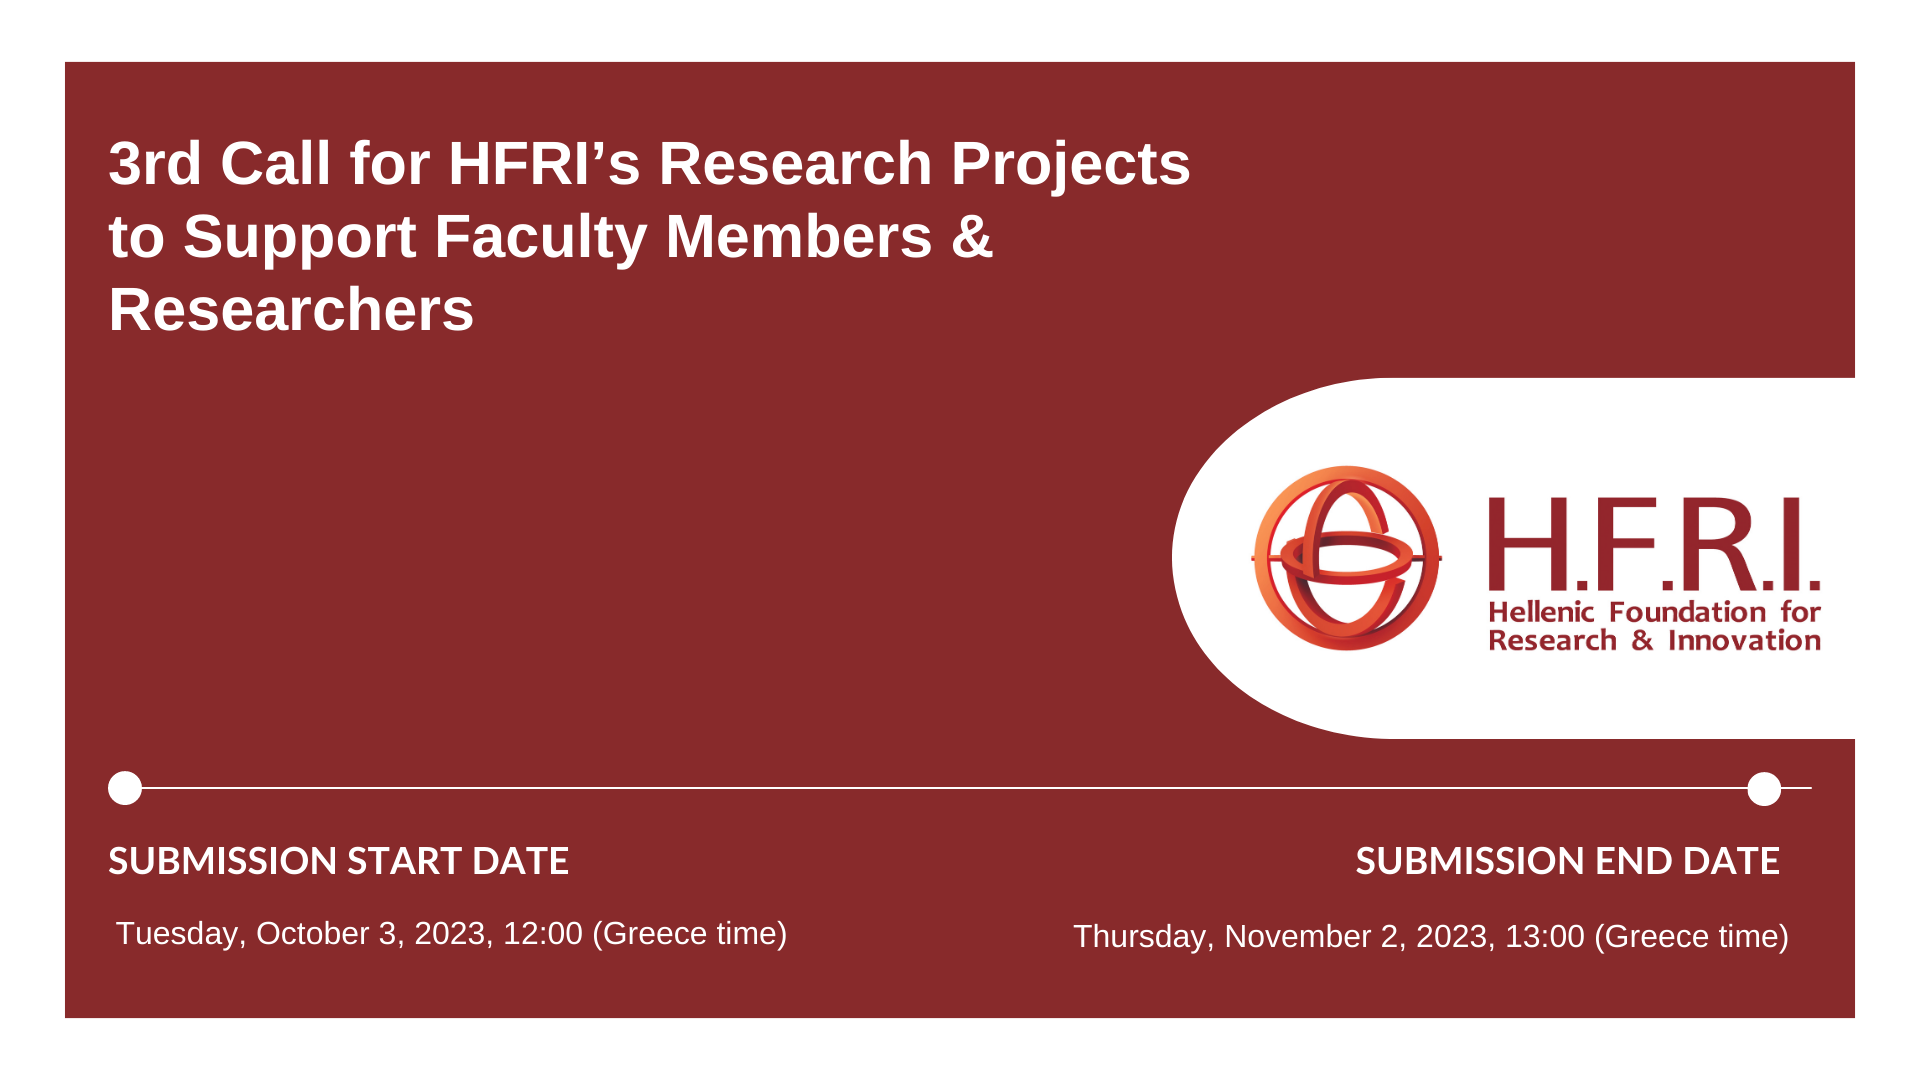 Announcement of the “3rd Call for HFRI Research Projects to support Faculty Members and Researchers”